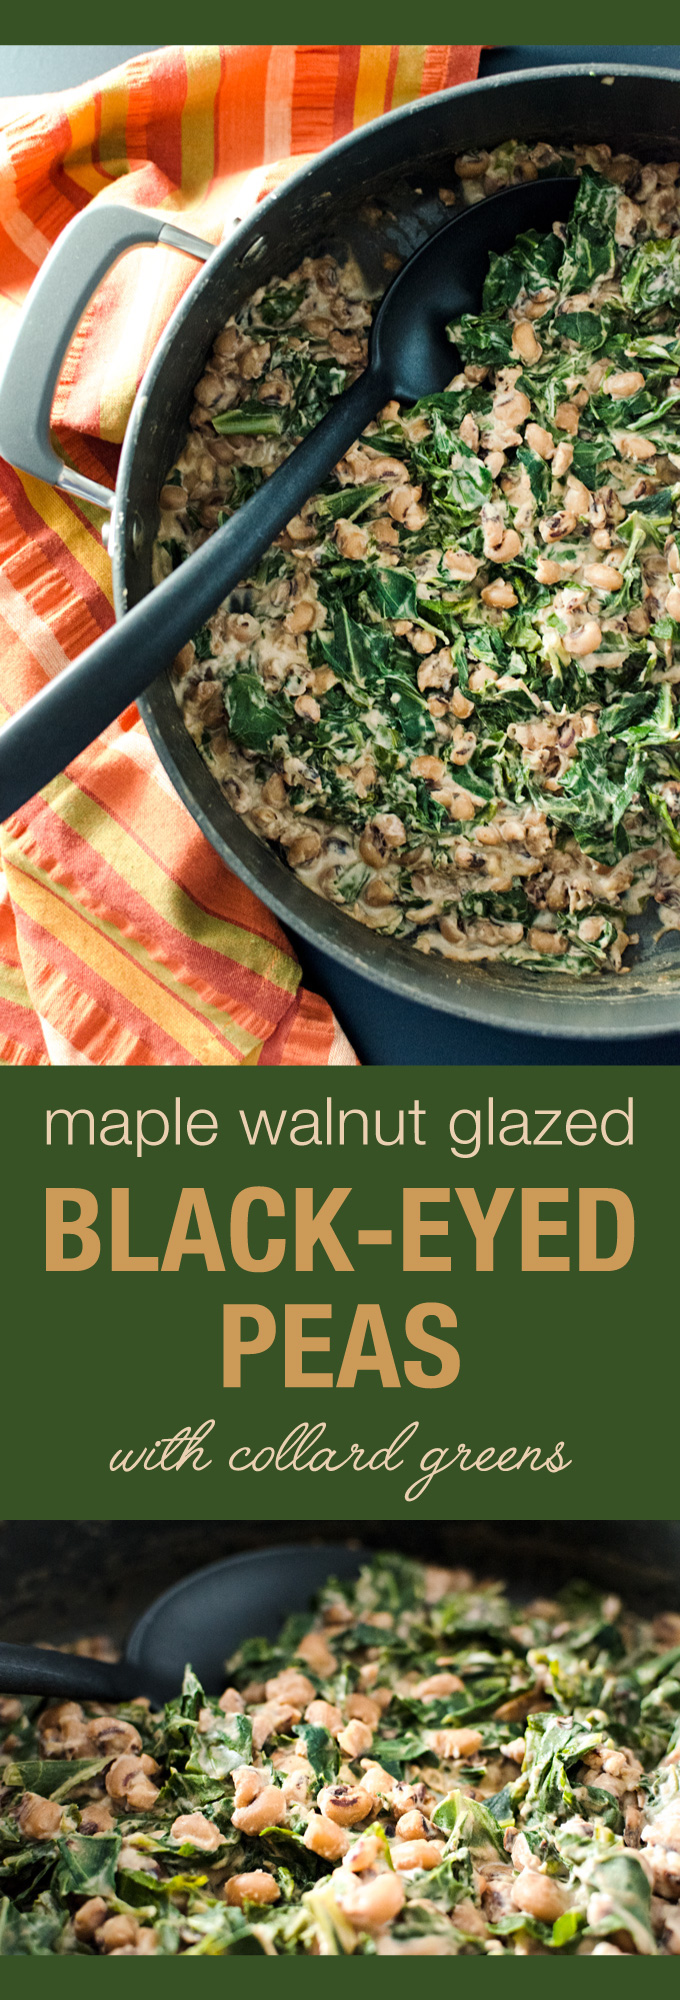 Maple Walnut Glazed Black-Eyed Peas with Collard Greens - inspired by flavors typically associated with baked ham, this gluten-free vegan recipe makes a tasty plant-based side-dish | VeggiePrimer.com